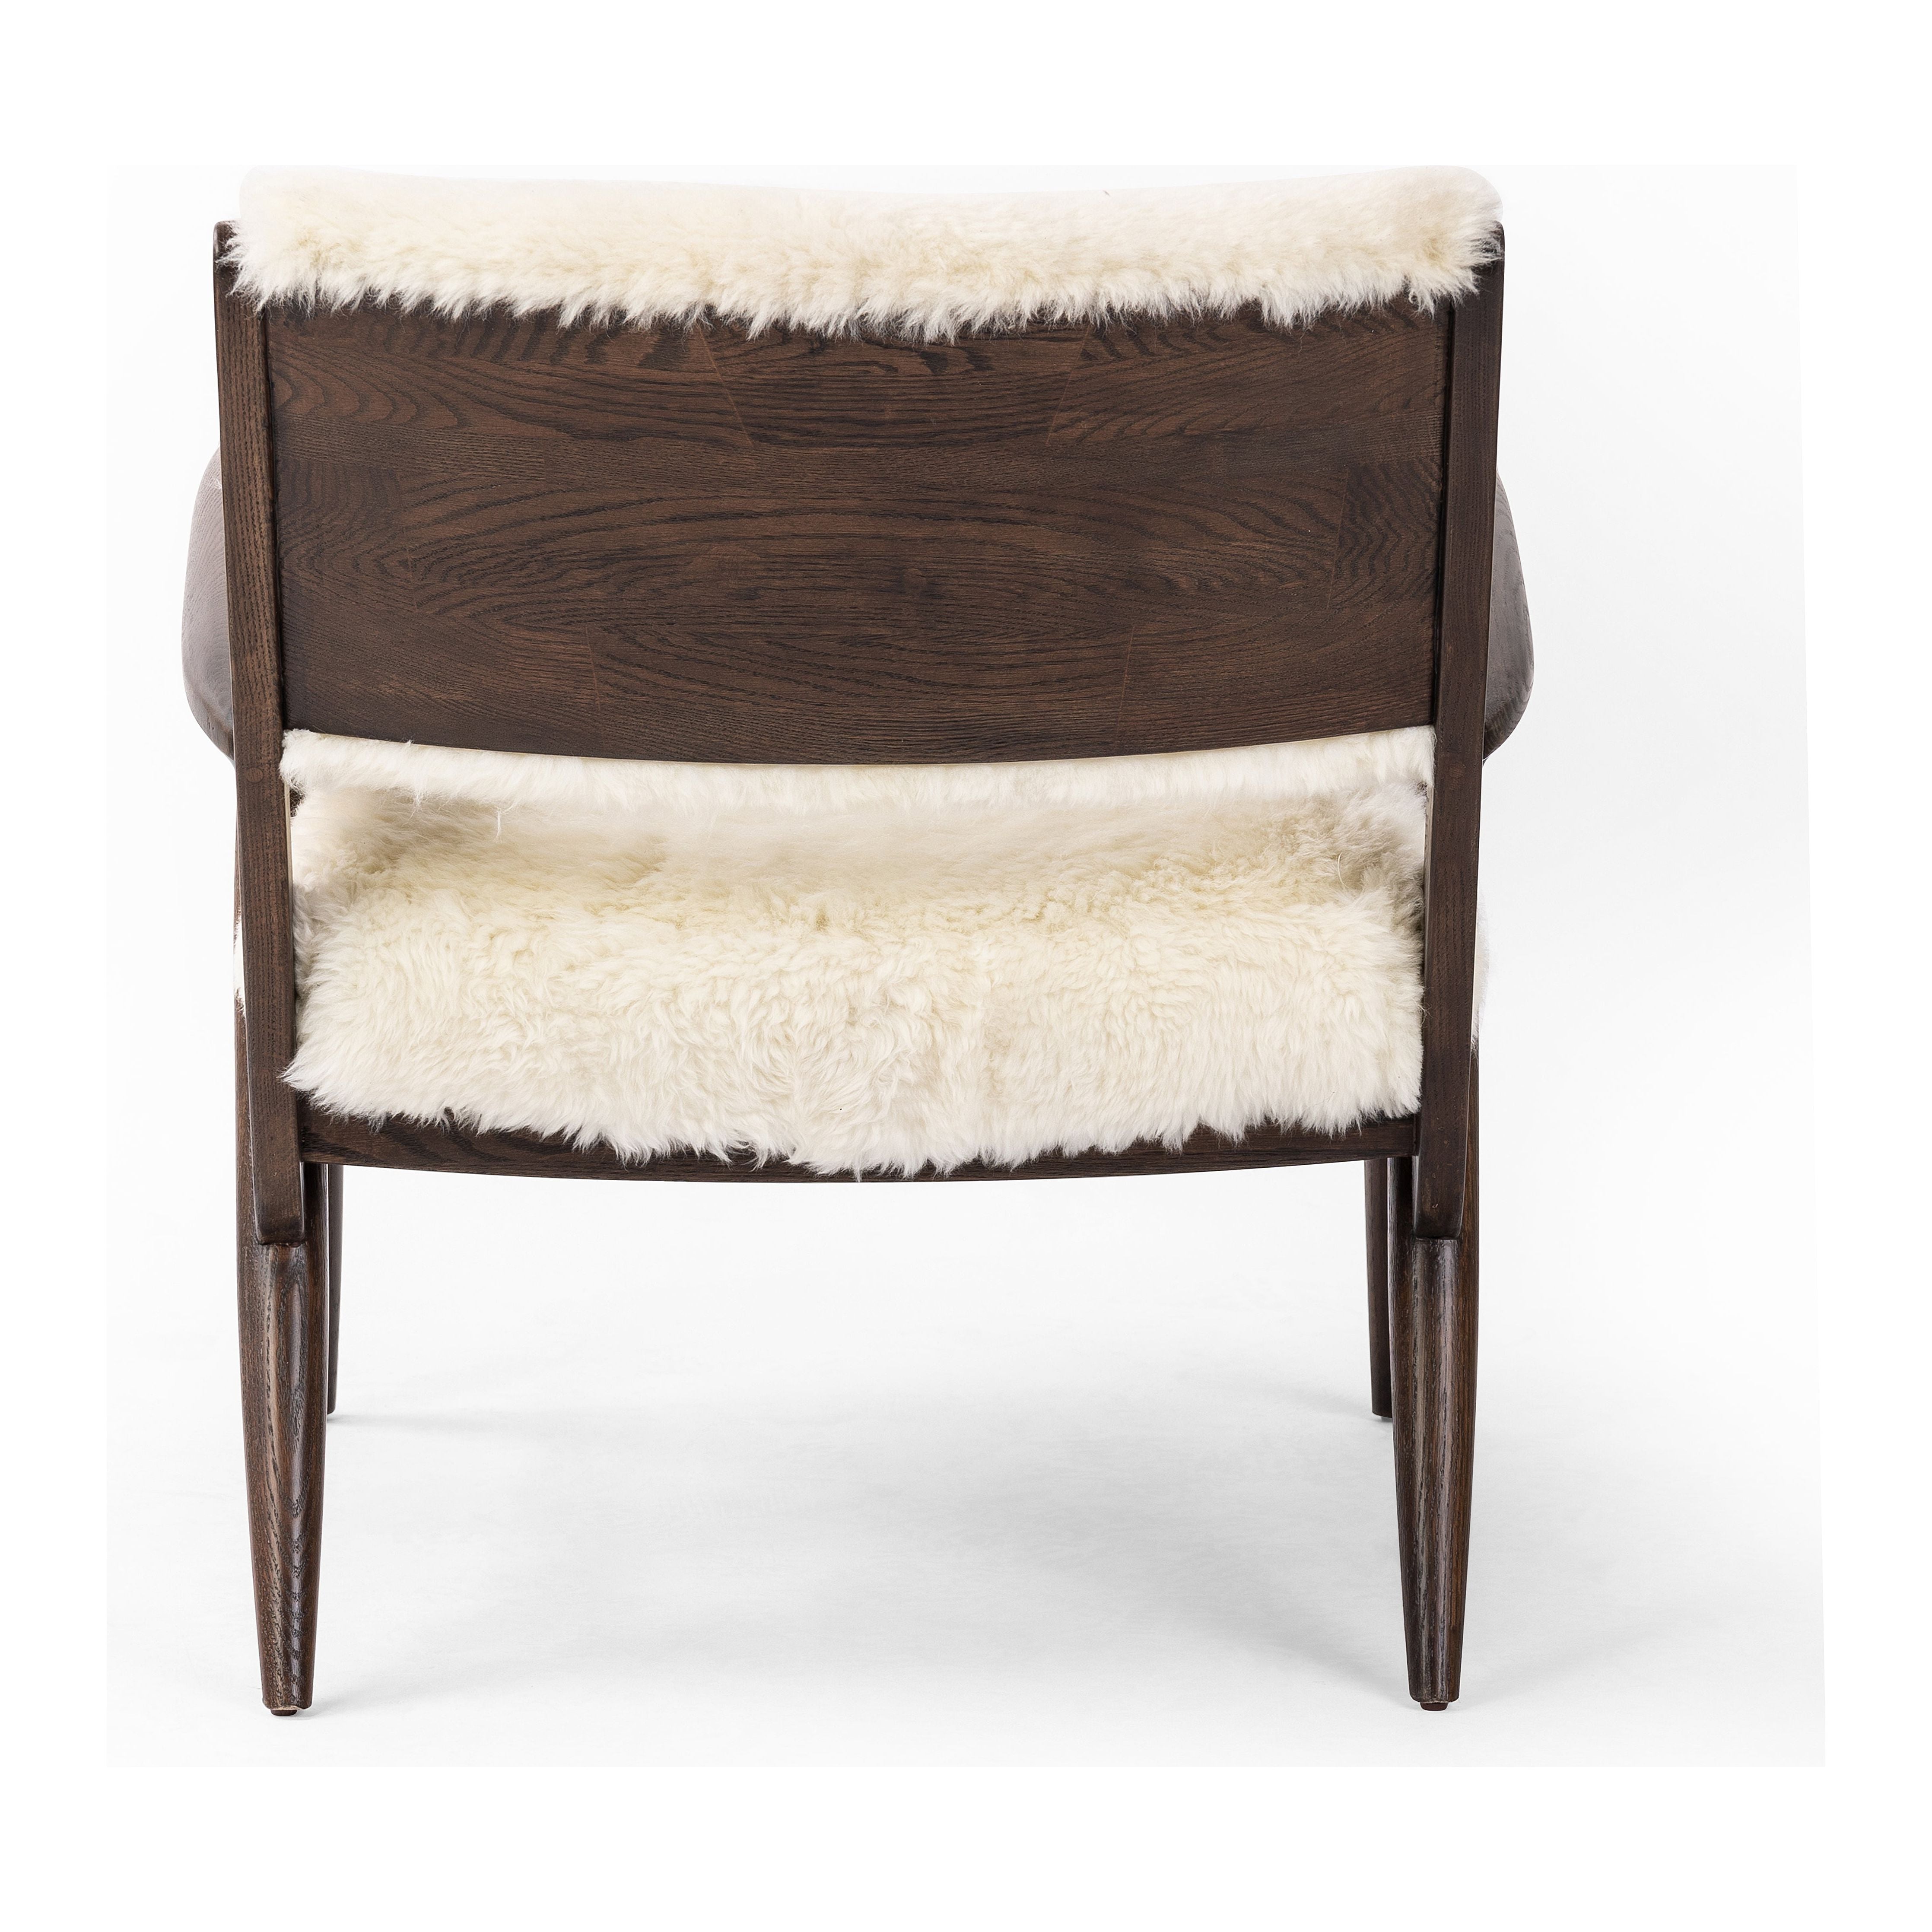 A modern take on the vintage school chair, upholstered in plush cream shearling of 100% sheepskin. Perfect as an accent chair or in pairs. Amethyst Home provides interior design, new construction, custom furniture, and area rugs in the Alpharetta metro area.